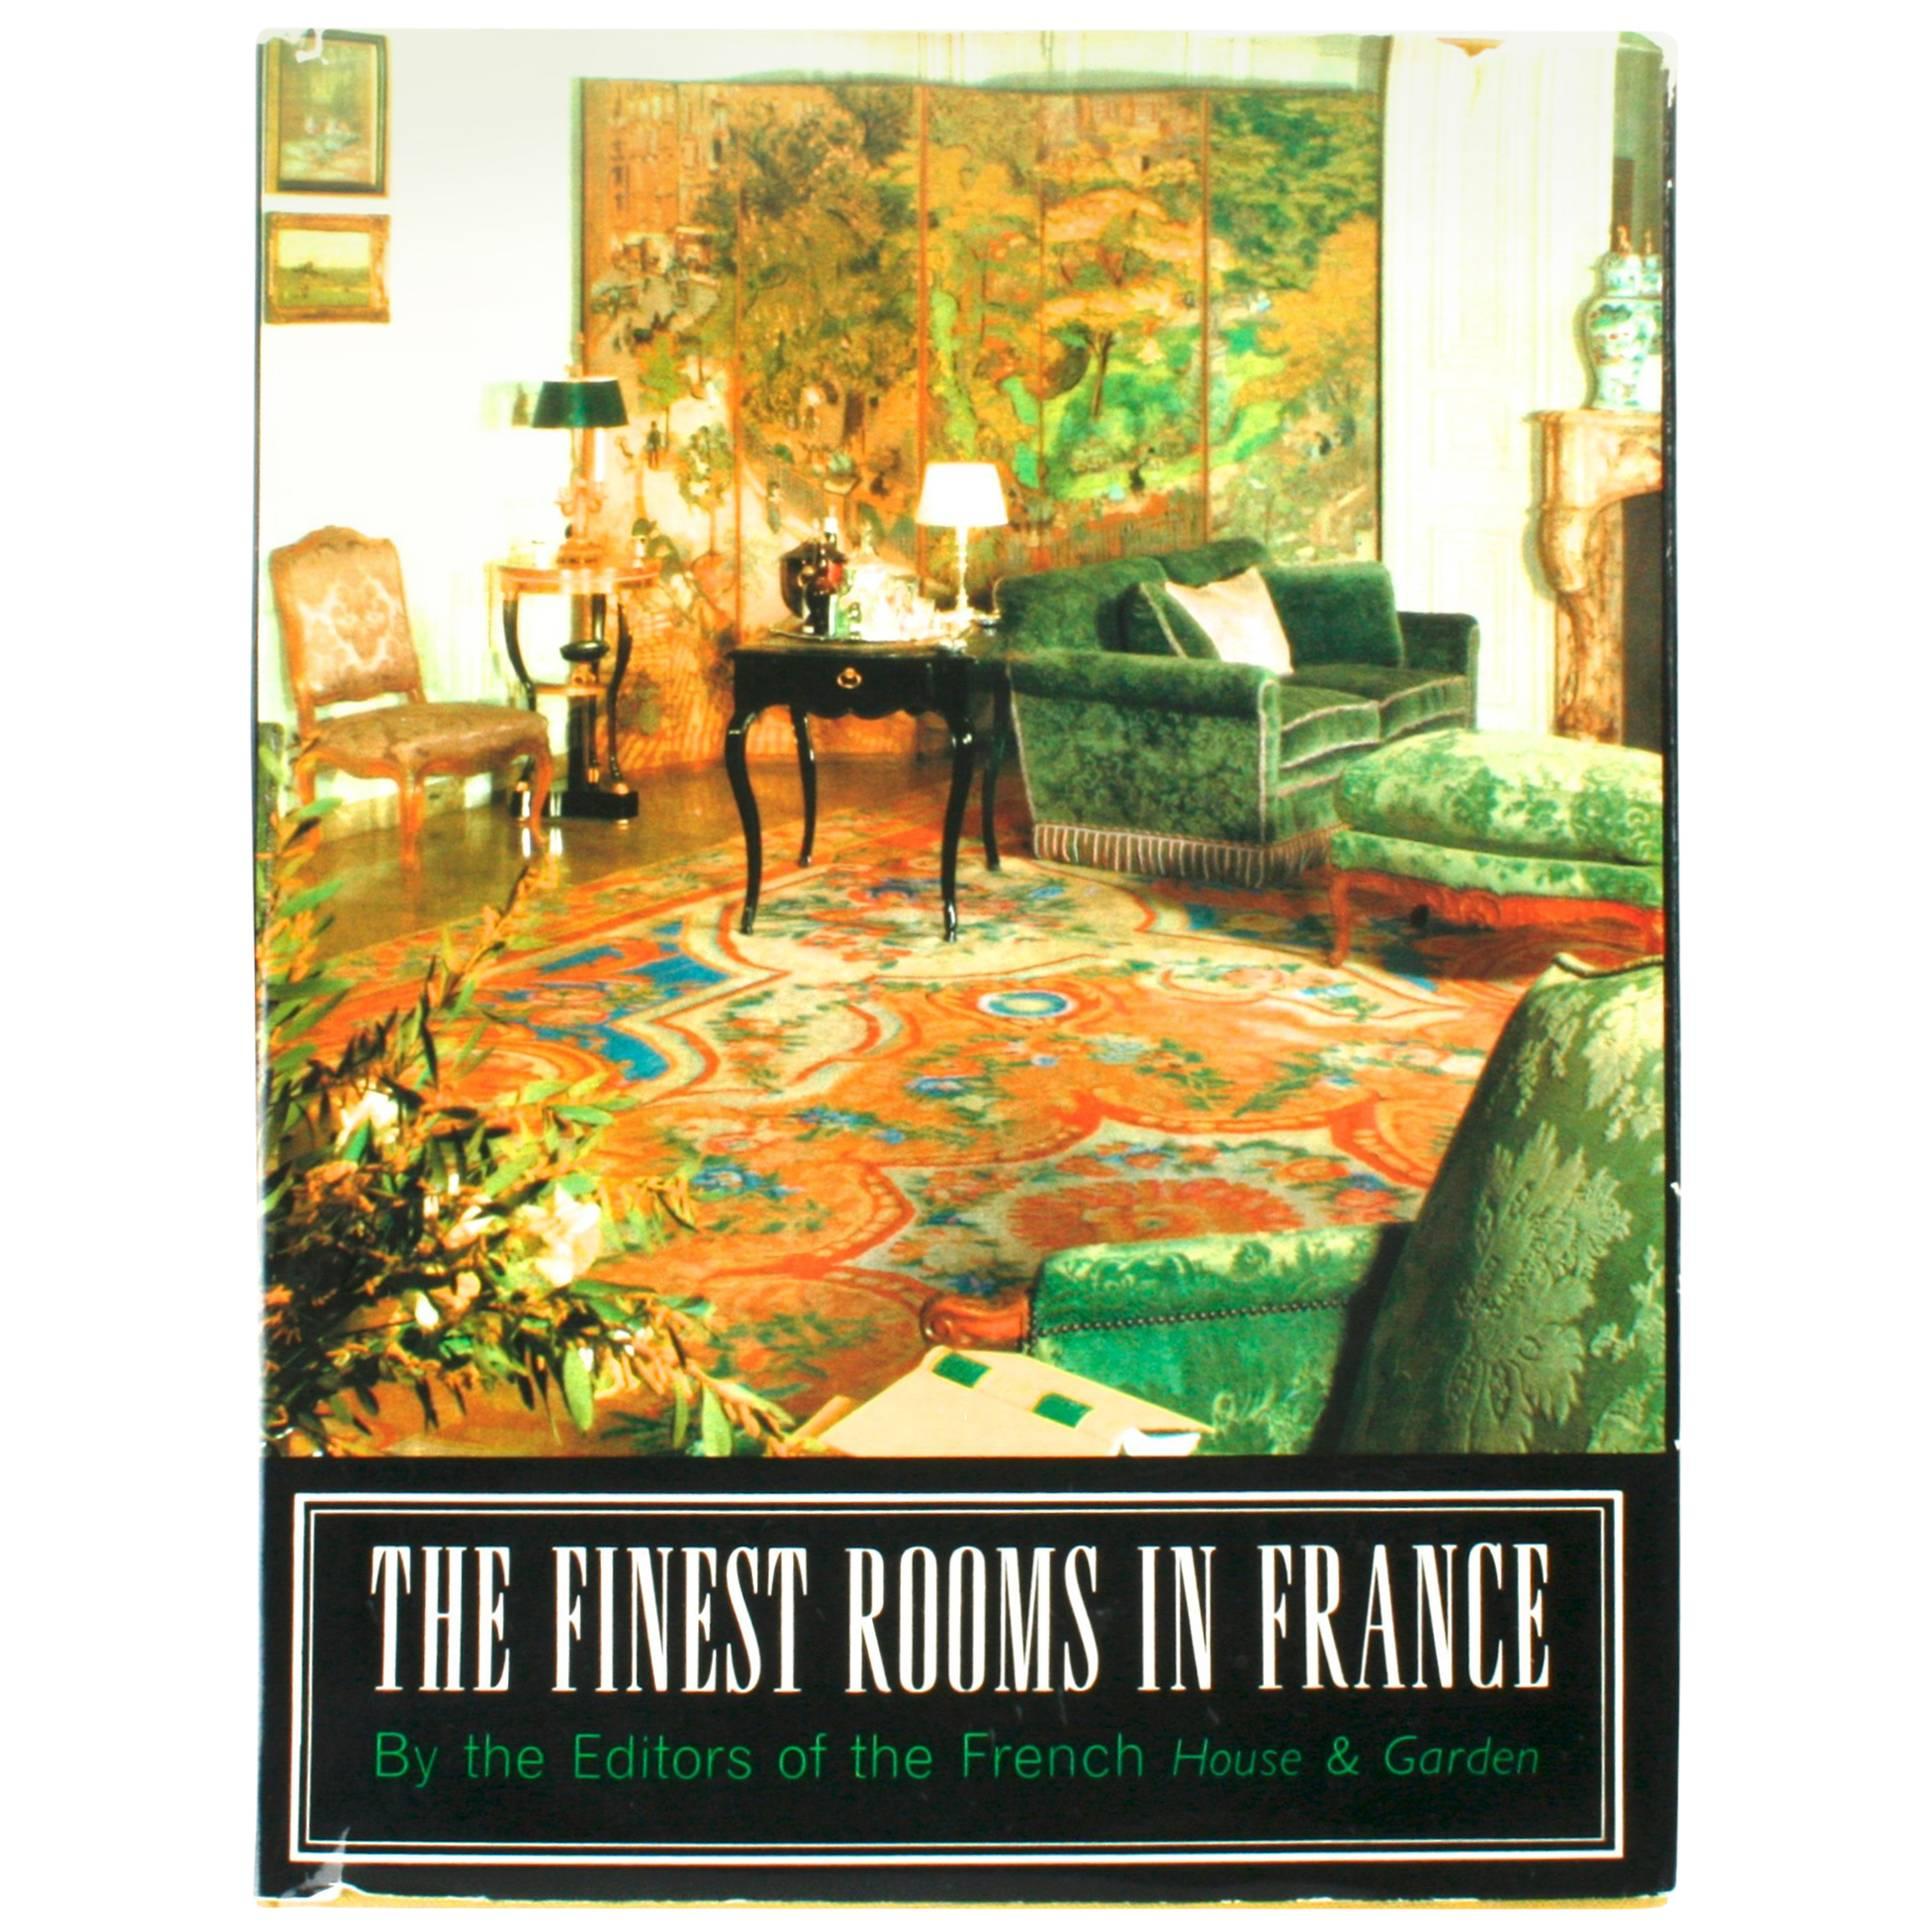 Finest Rooms in France by the French House & Garden, First Edition